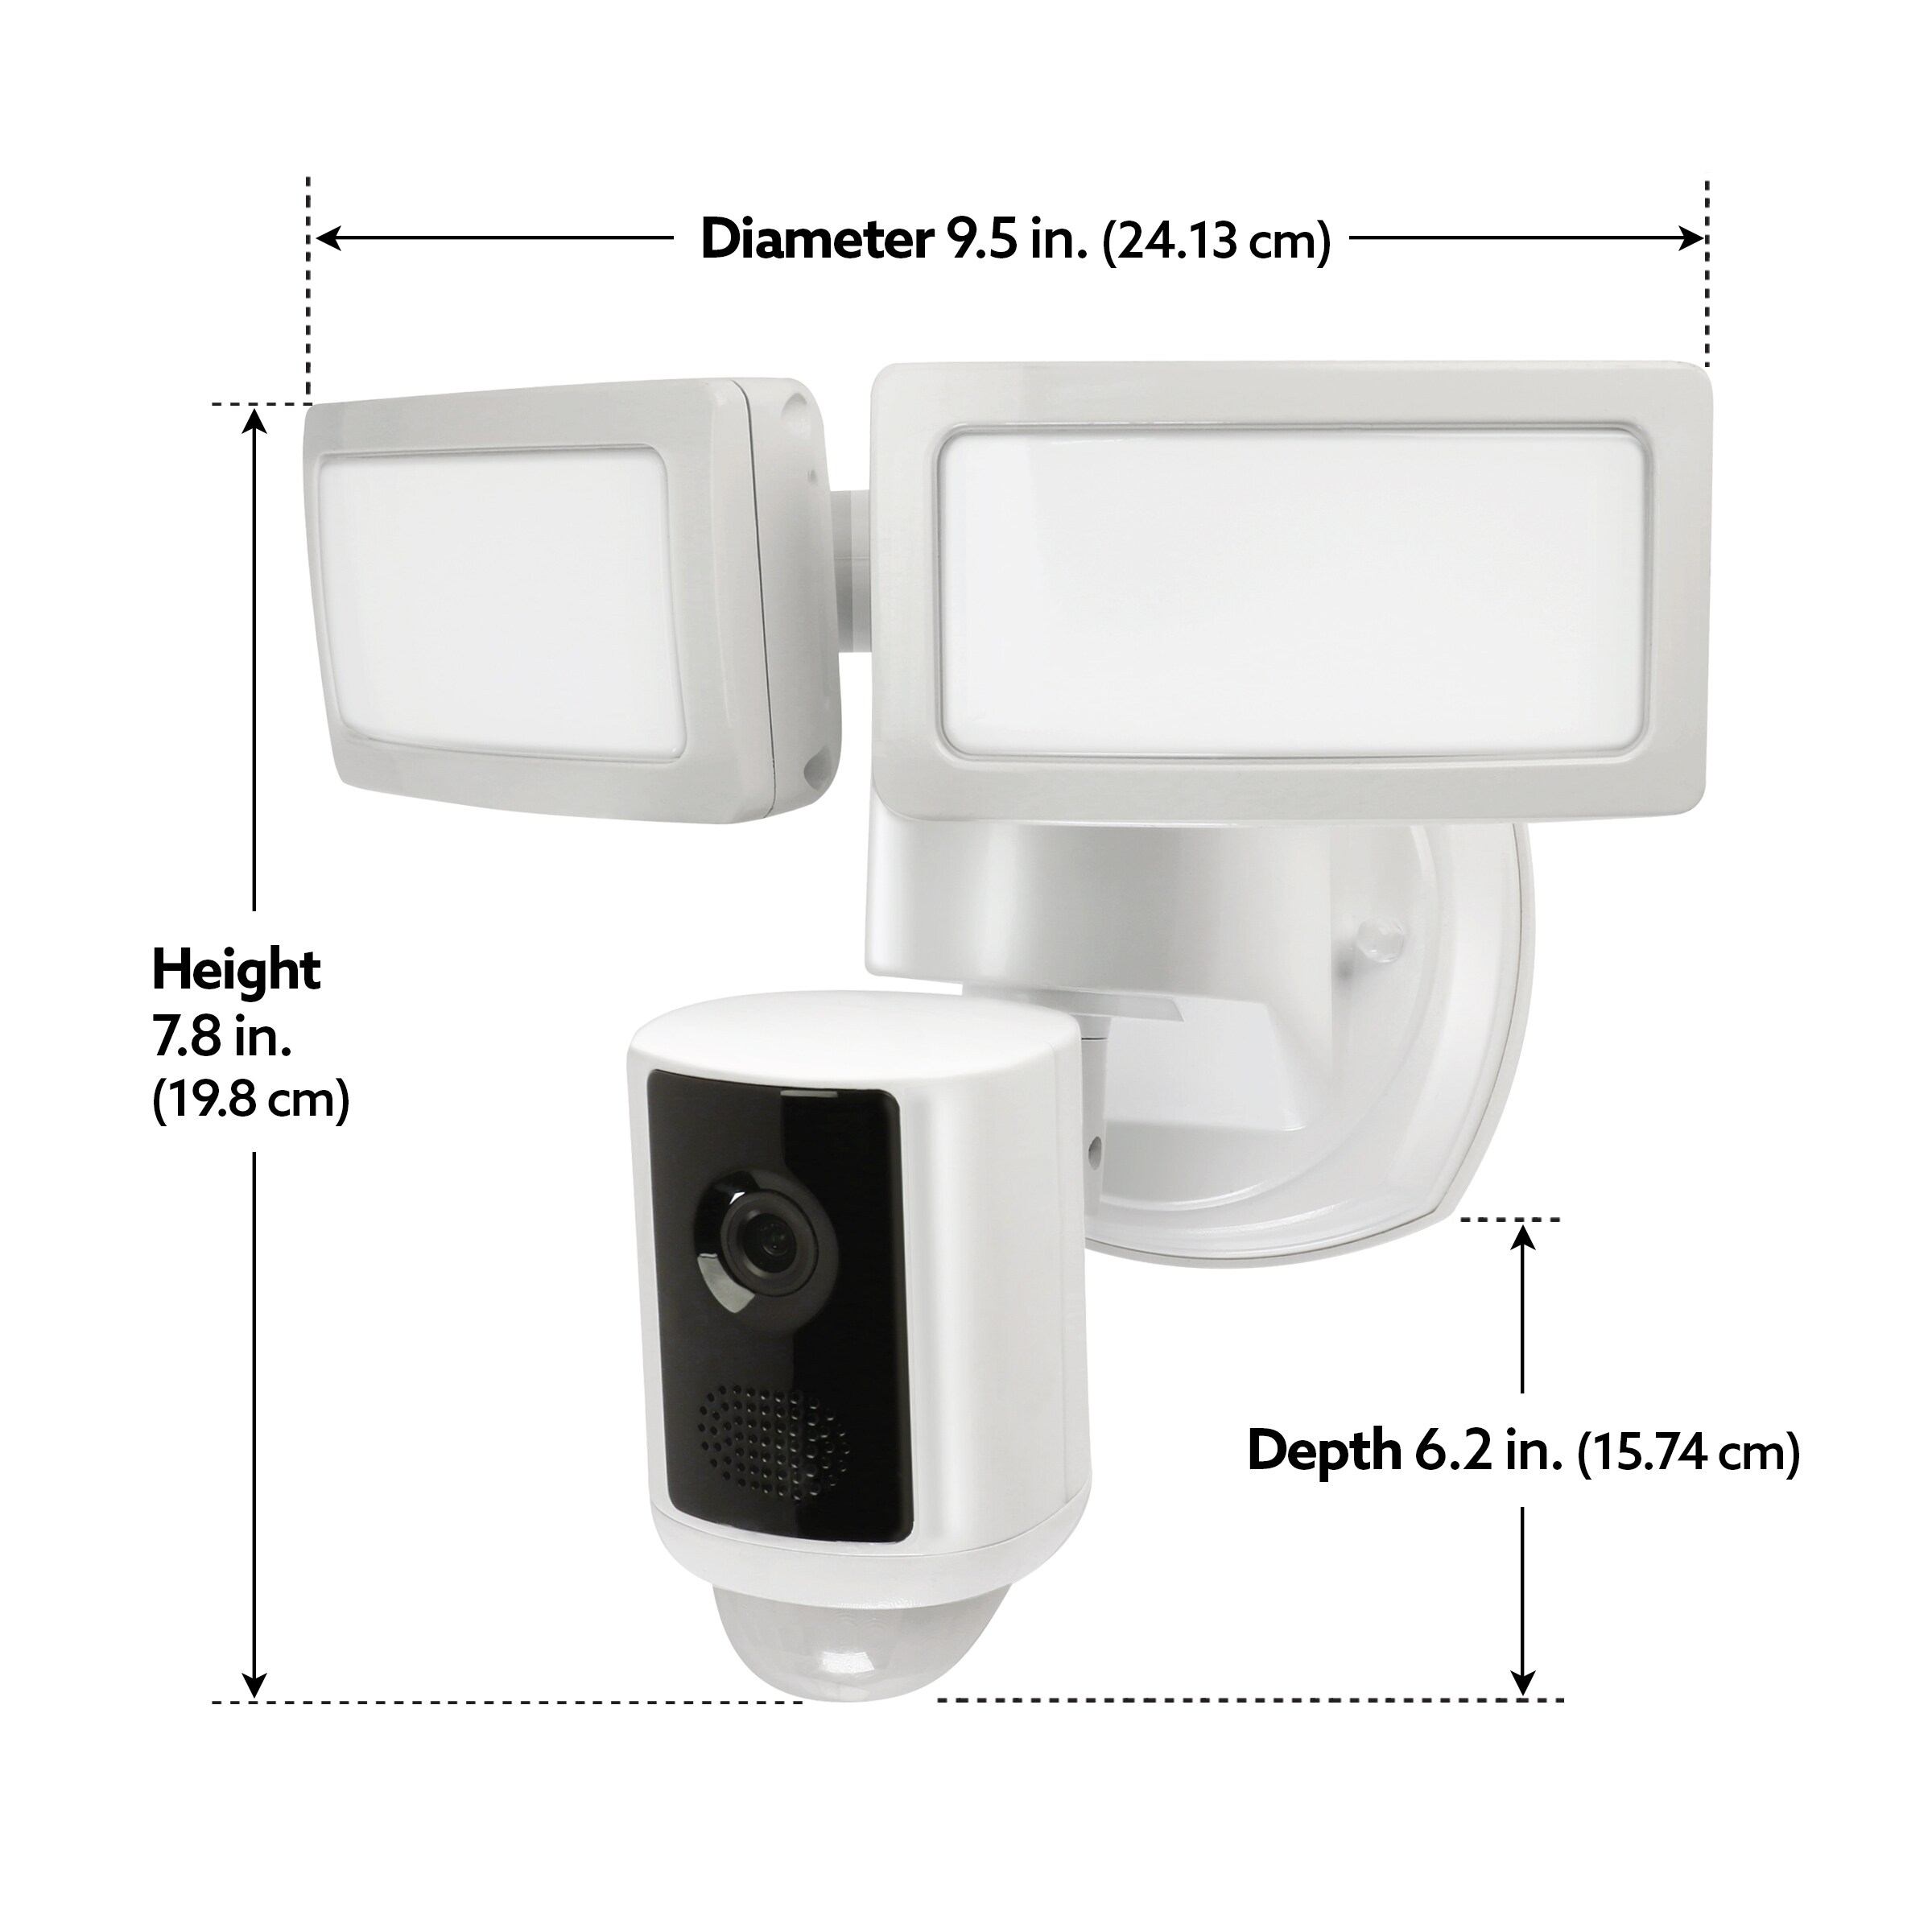 4" White Stick-On and Removable Shelf For Cloud Security Cameras and Small Spea 